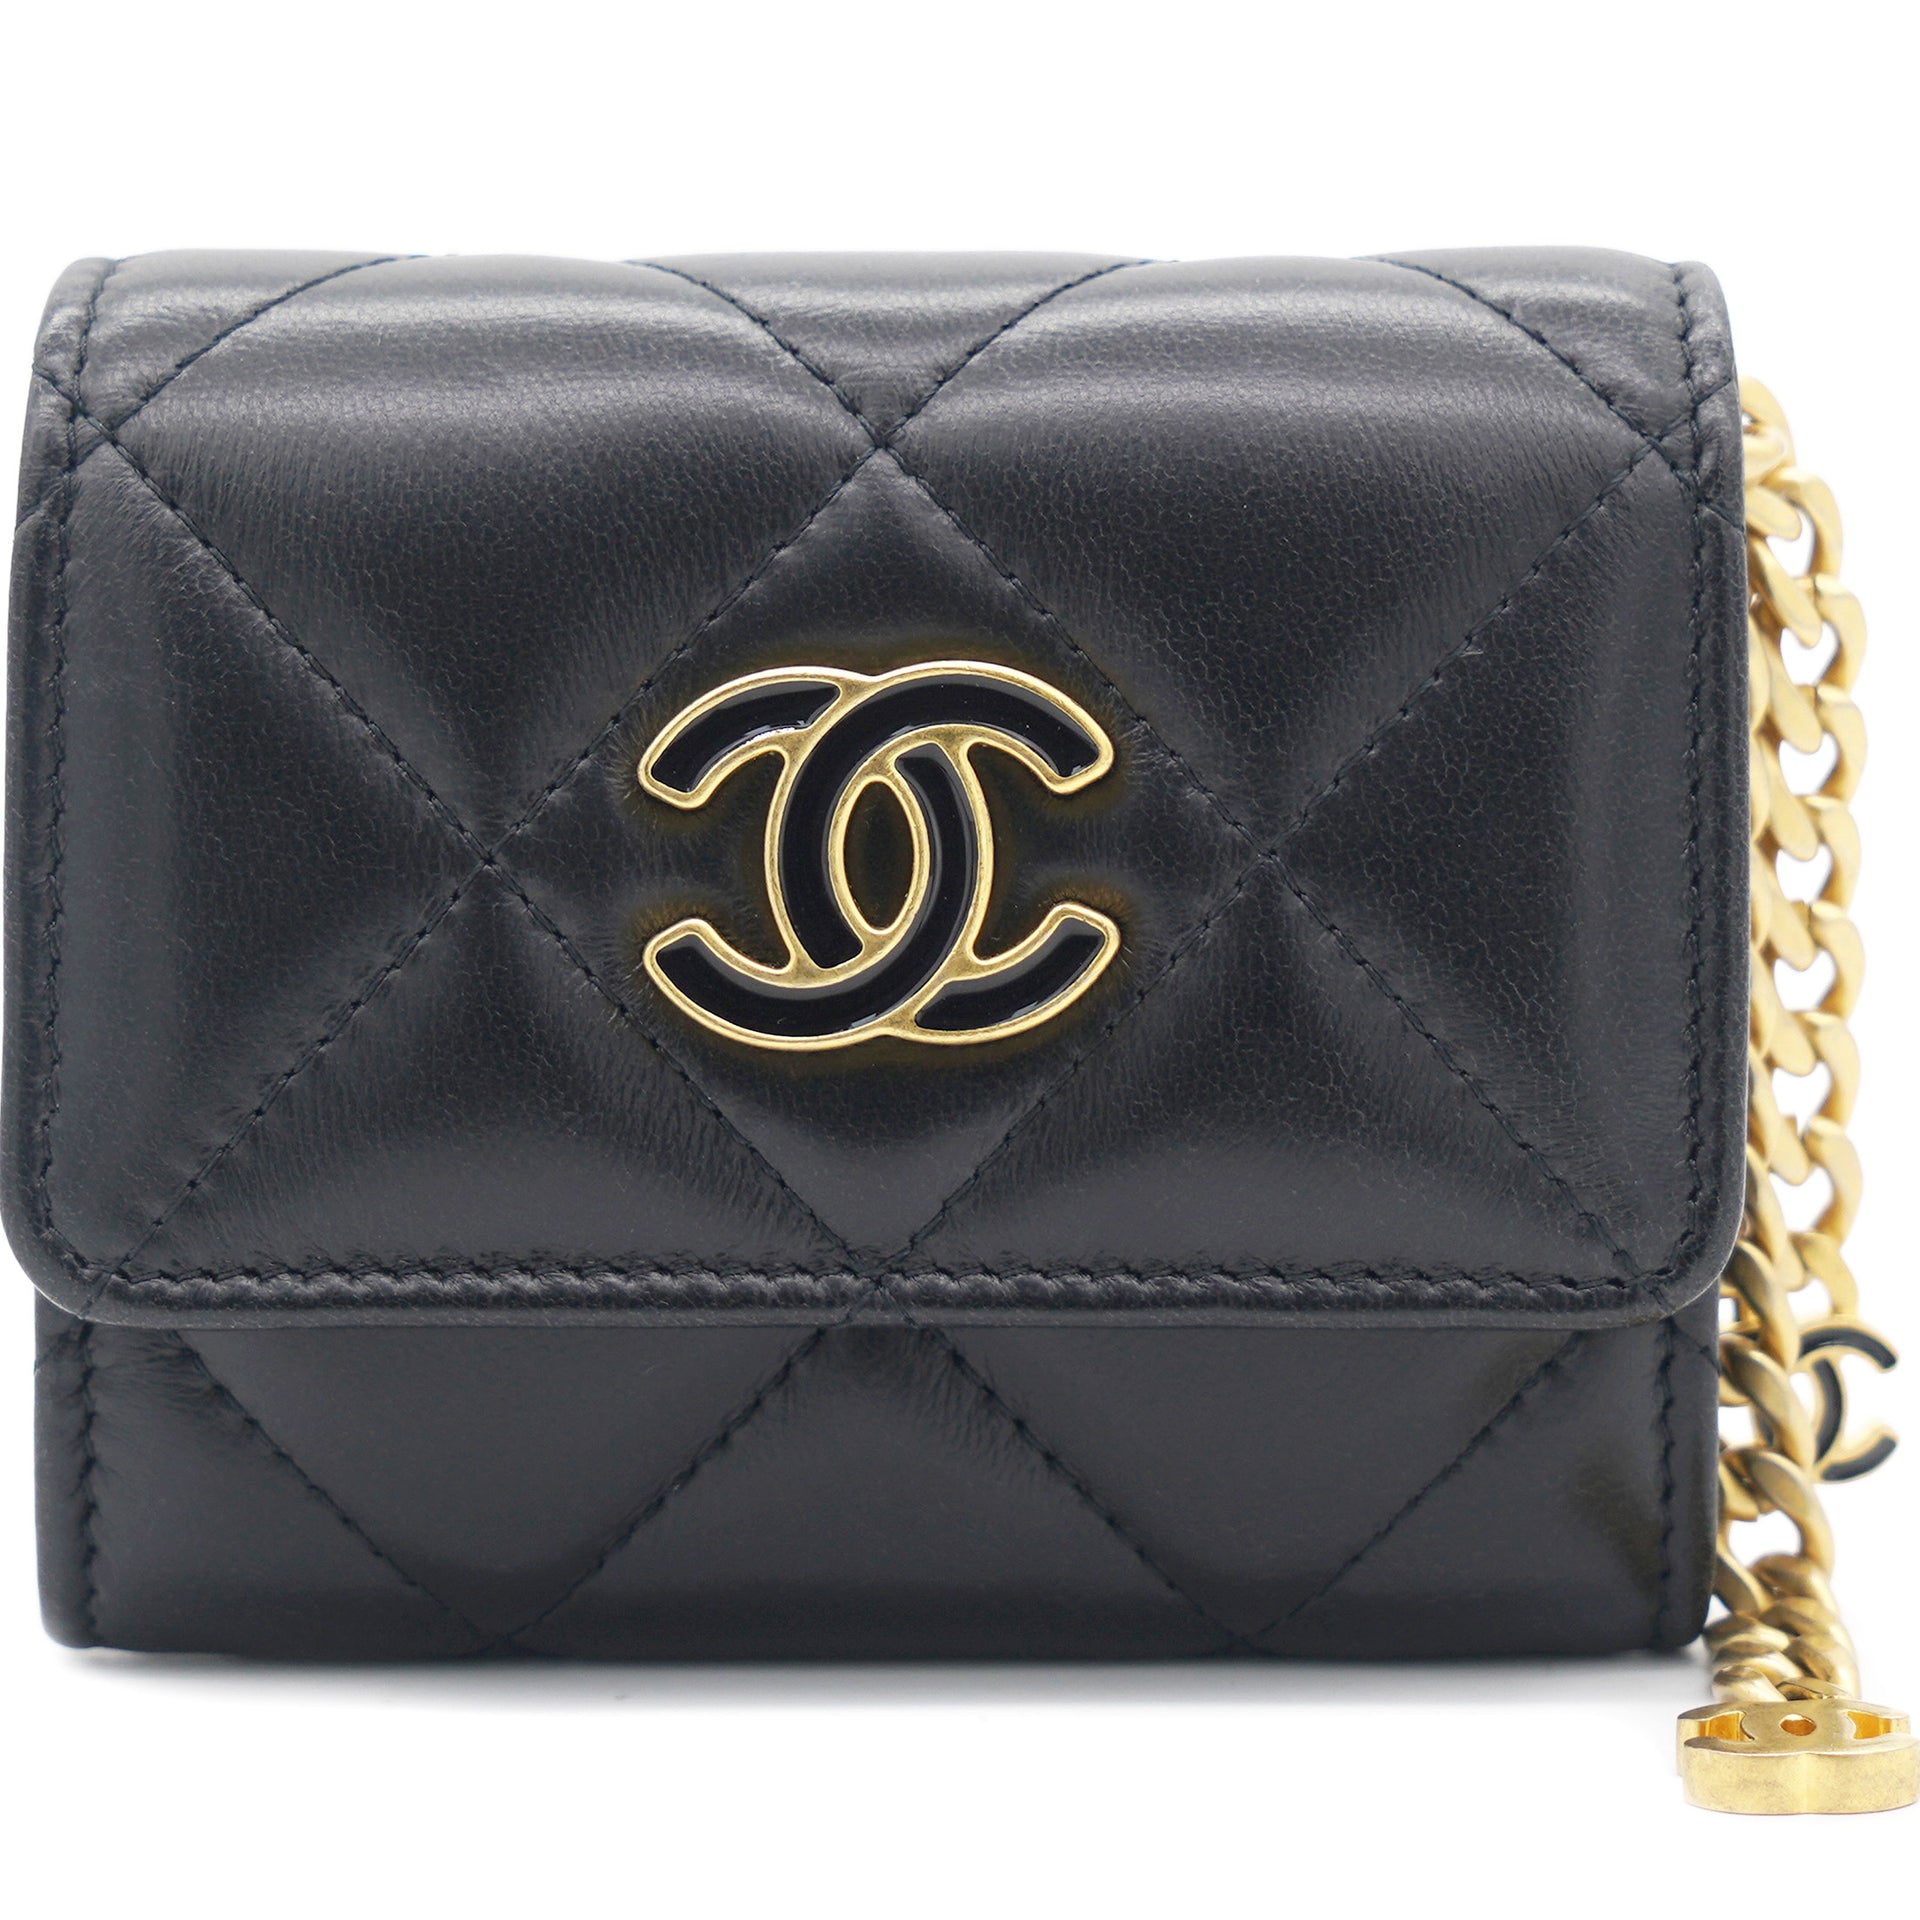 Chanel CC Key Ring Lambskin Leather Coin Case Purse